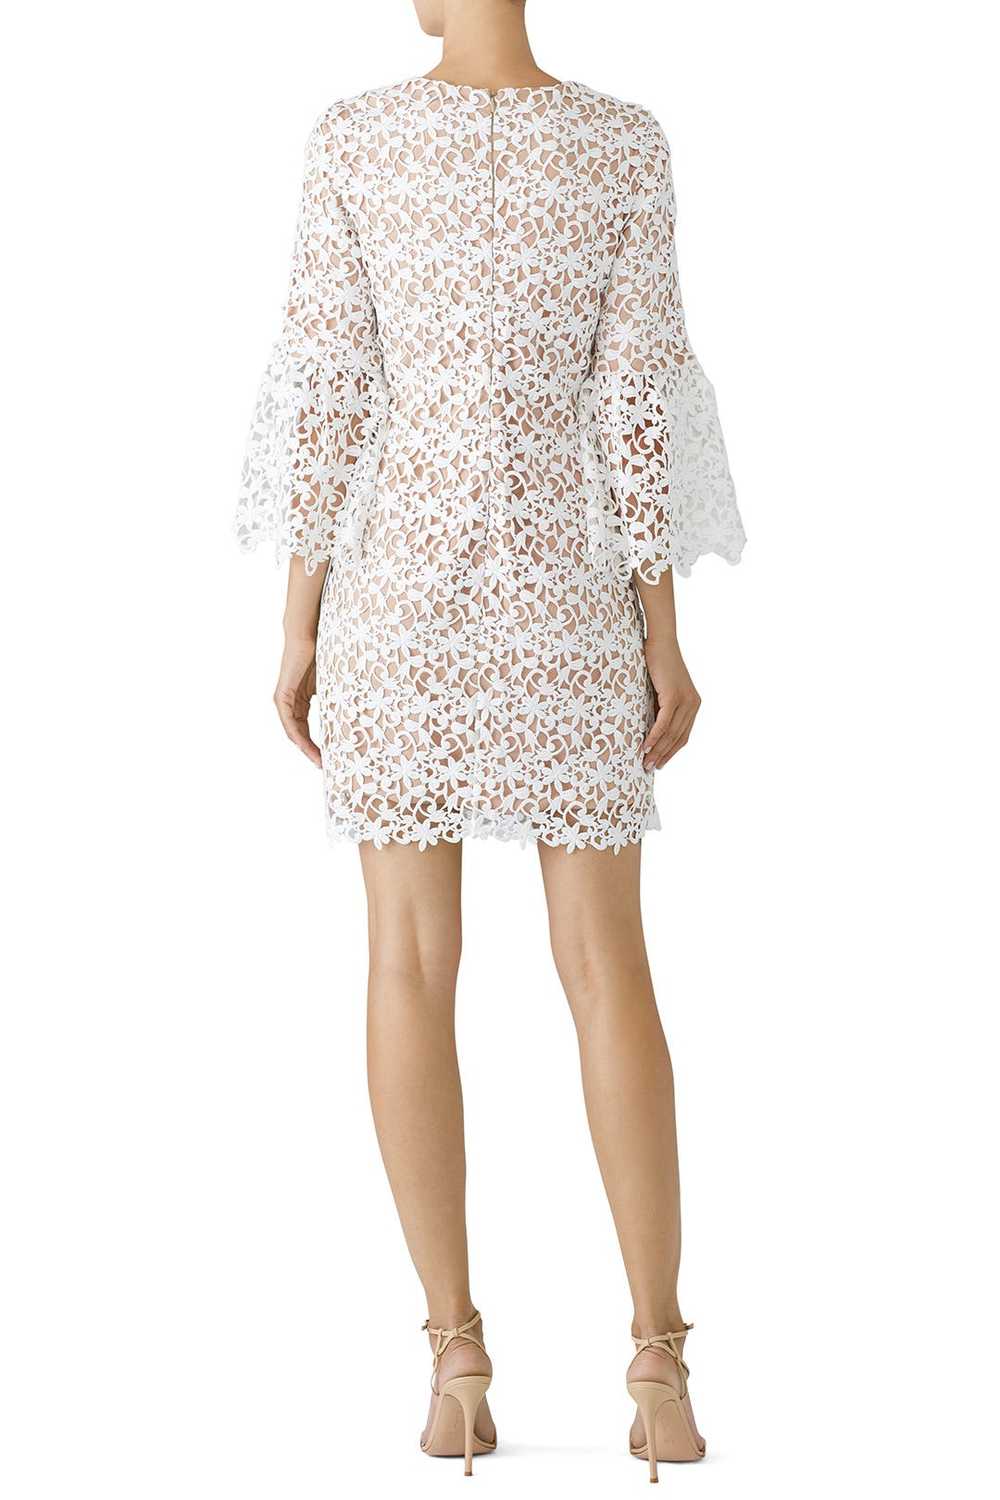 Dress The Population Bell Sleeve Lace Dress - image 2